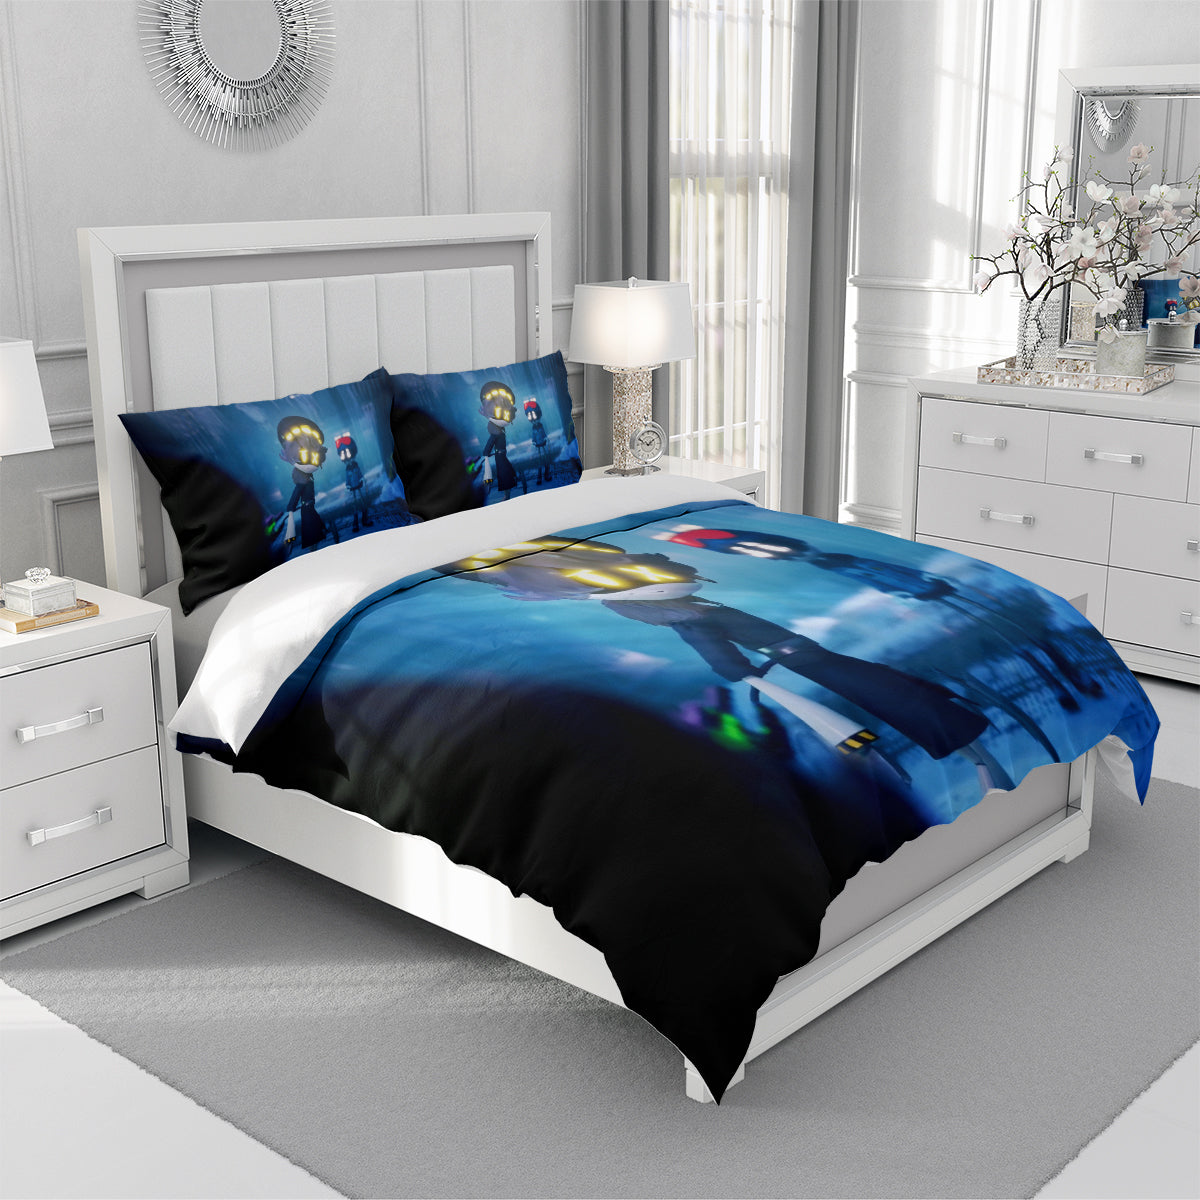 3D Customized Stitch Bedding Set Duvet Cover Pillowcase Without Comforter